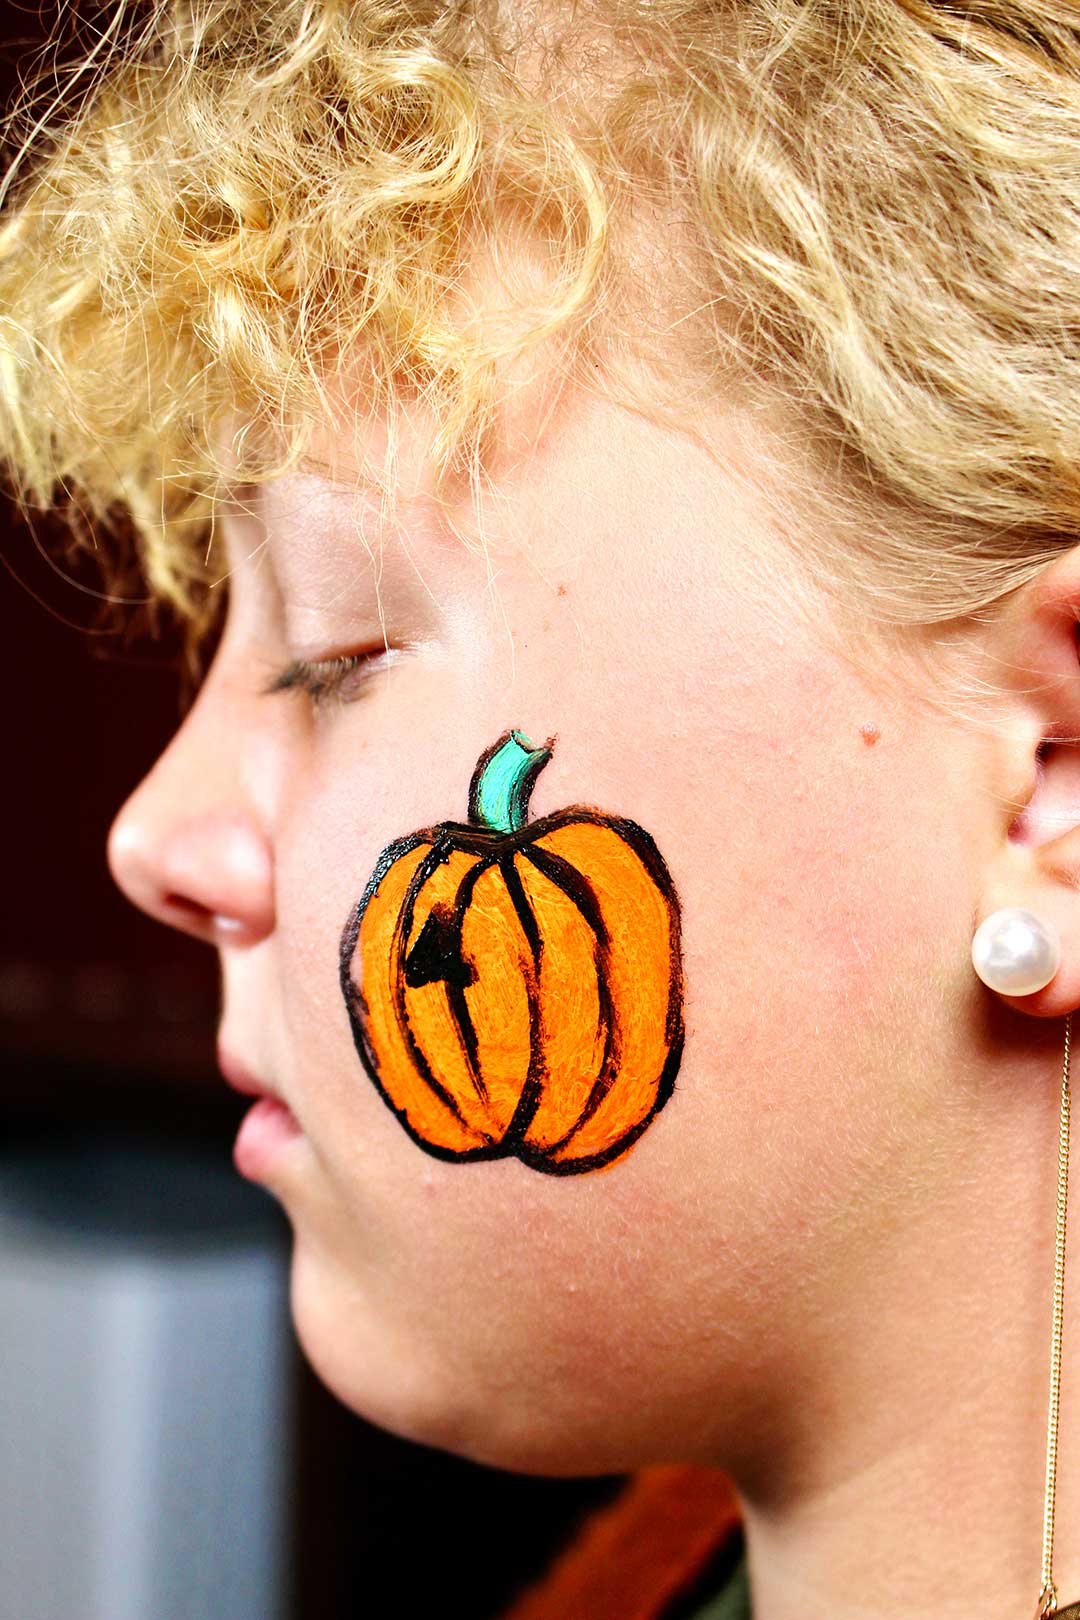 Profile of girls face with more detailed painting of orange pumpkin with green stem and black outline.